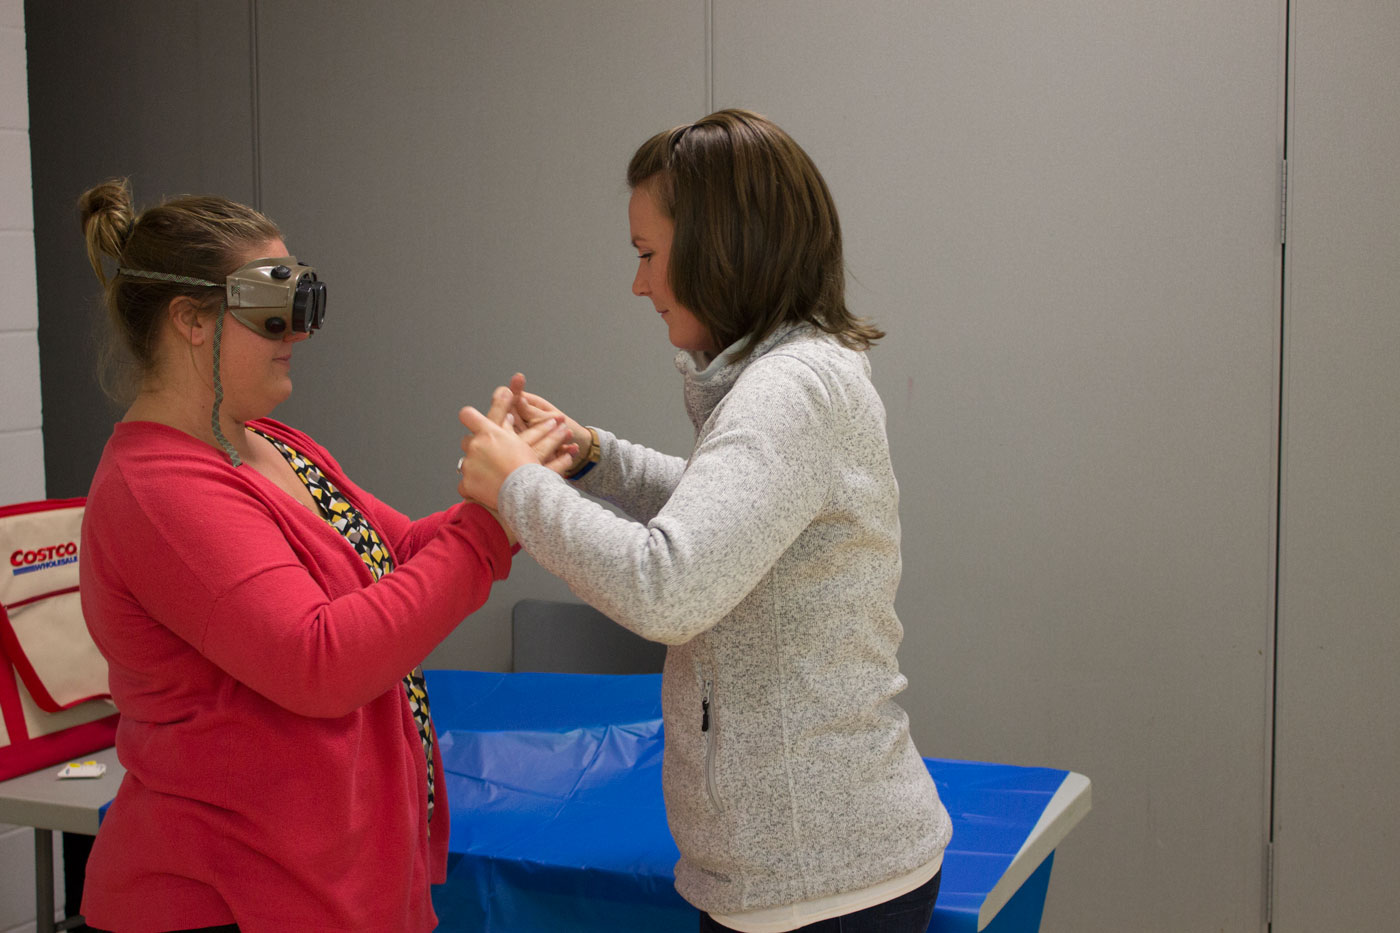 Two women stand across from one another, acting out a simulation exercise. One woman wears simulation goggles as they communicate with hand-over-hand sign language.